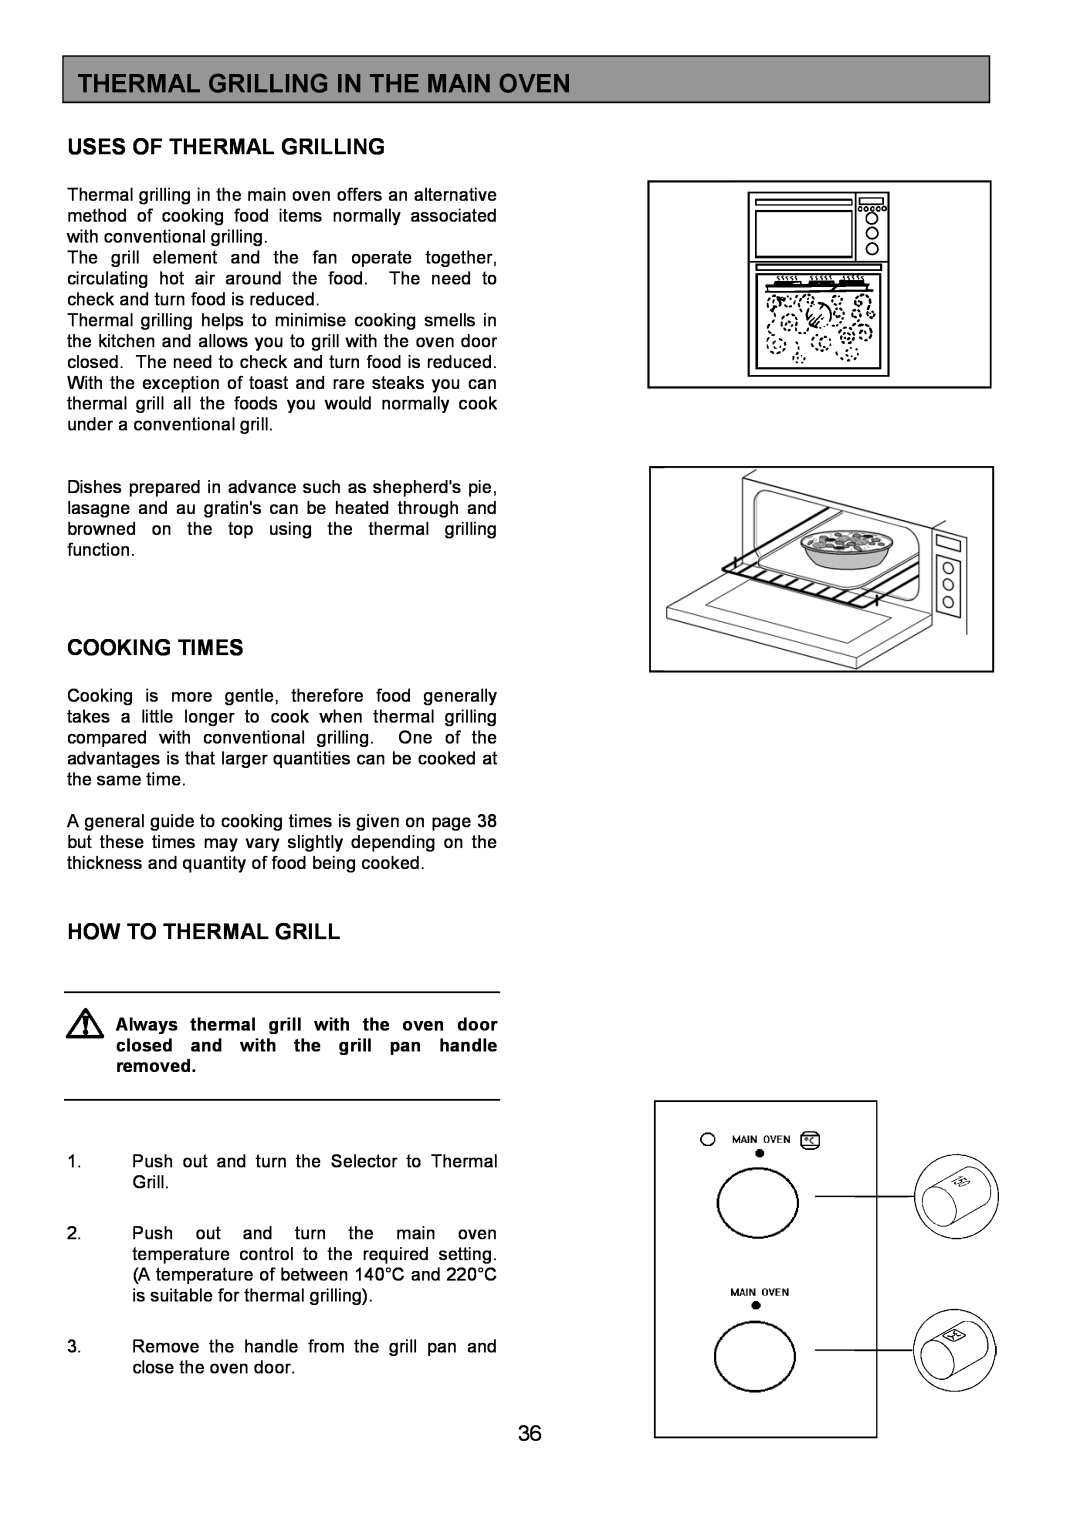 Zanussi 311608901 manual Thermal Grilling In The Main Oven, Uses Of Thermal Grilling, Cooking Times, How To Thermal Grill 